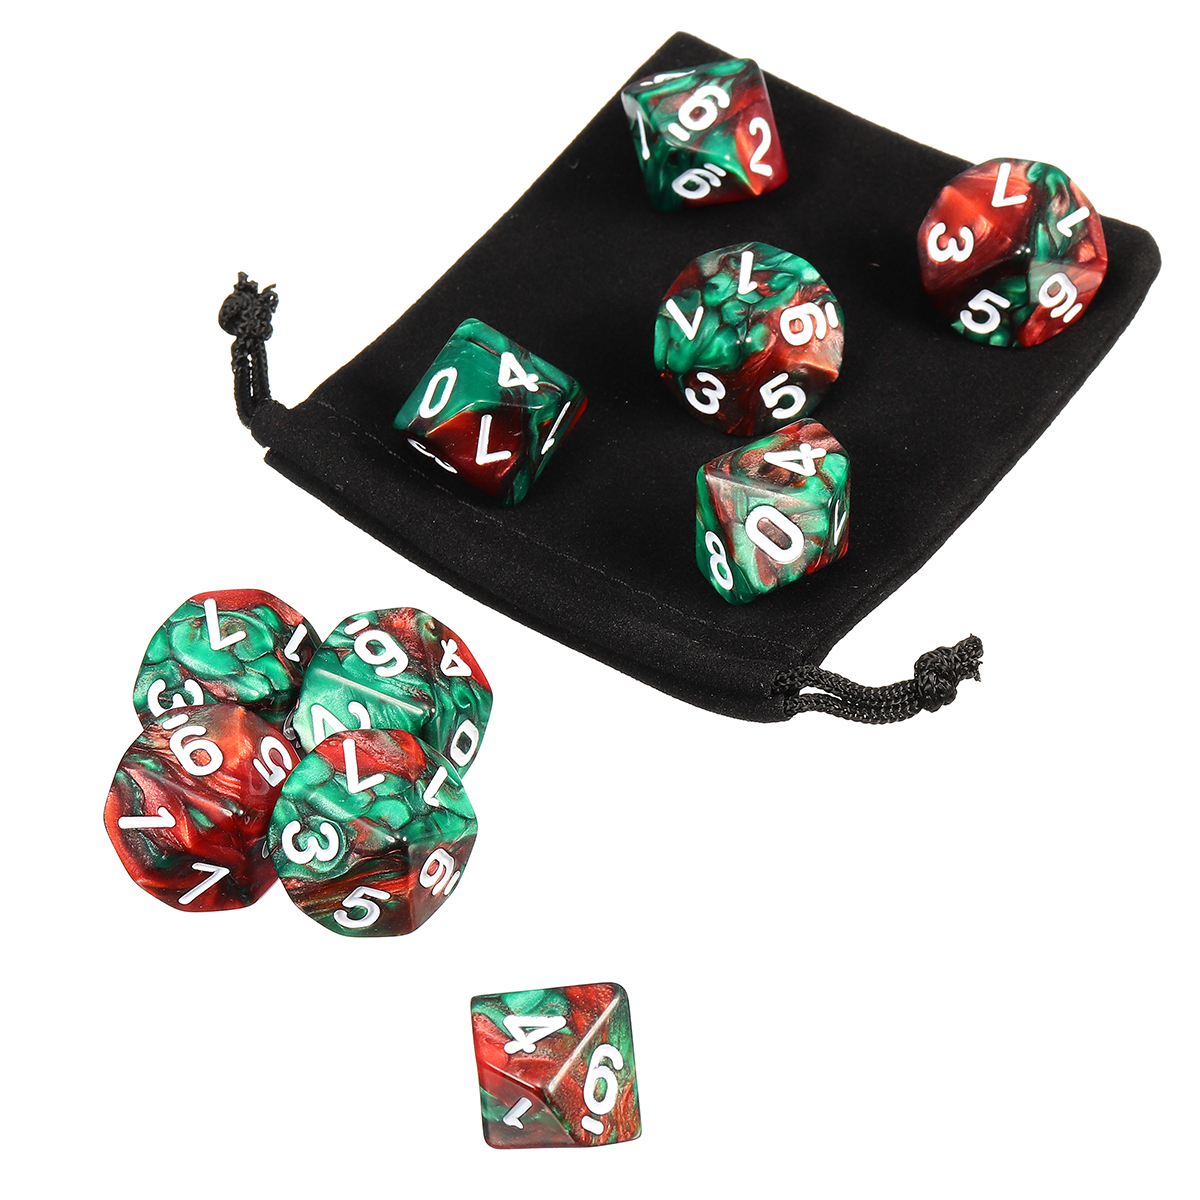 10pcs-10-Sided-Dice-D10-Polyhedral-Dice-RPG-Role-Playing-Game-Dices-w-bag-1351752-9